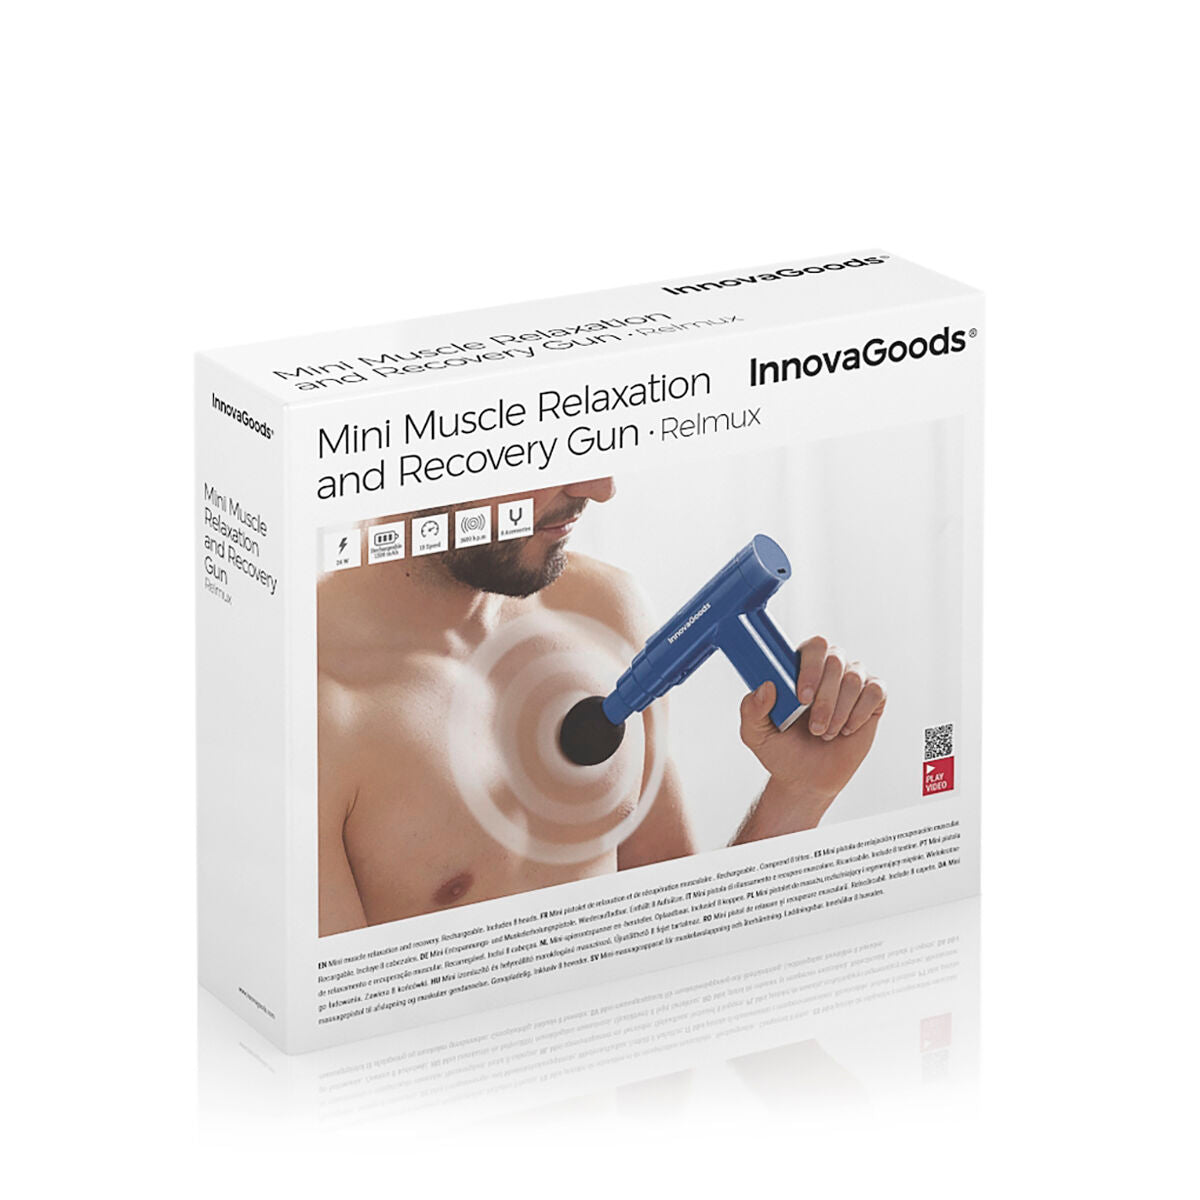 Mini Muscle Relaxation and Recovery Gun Relmux